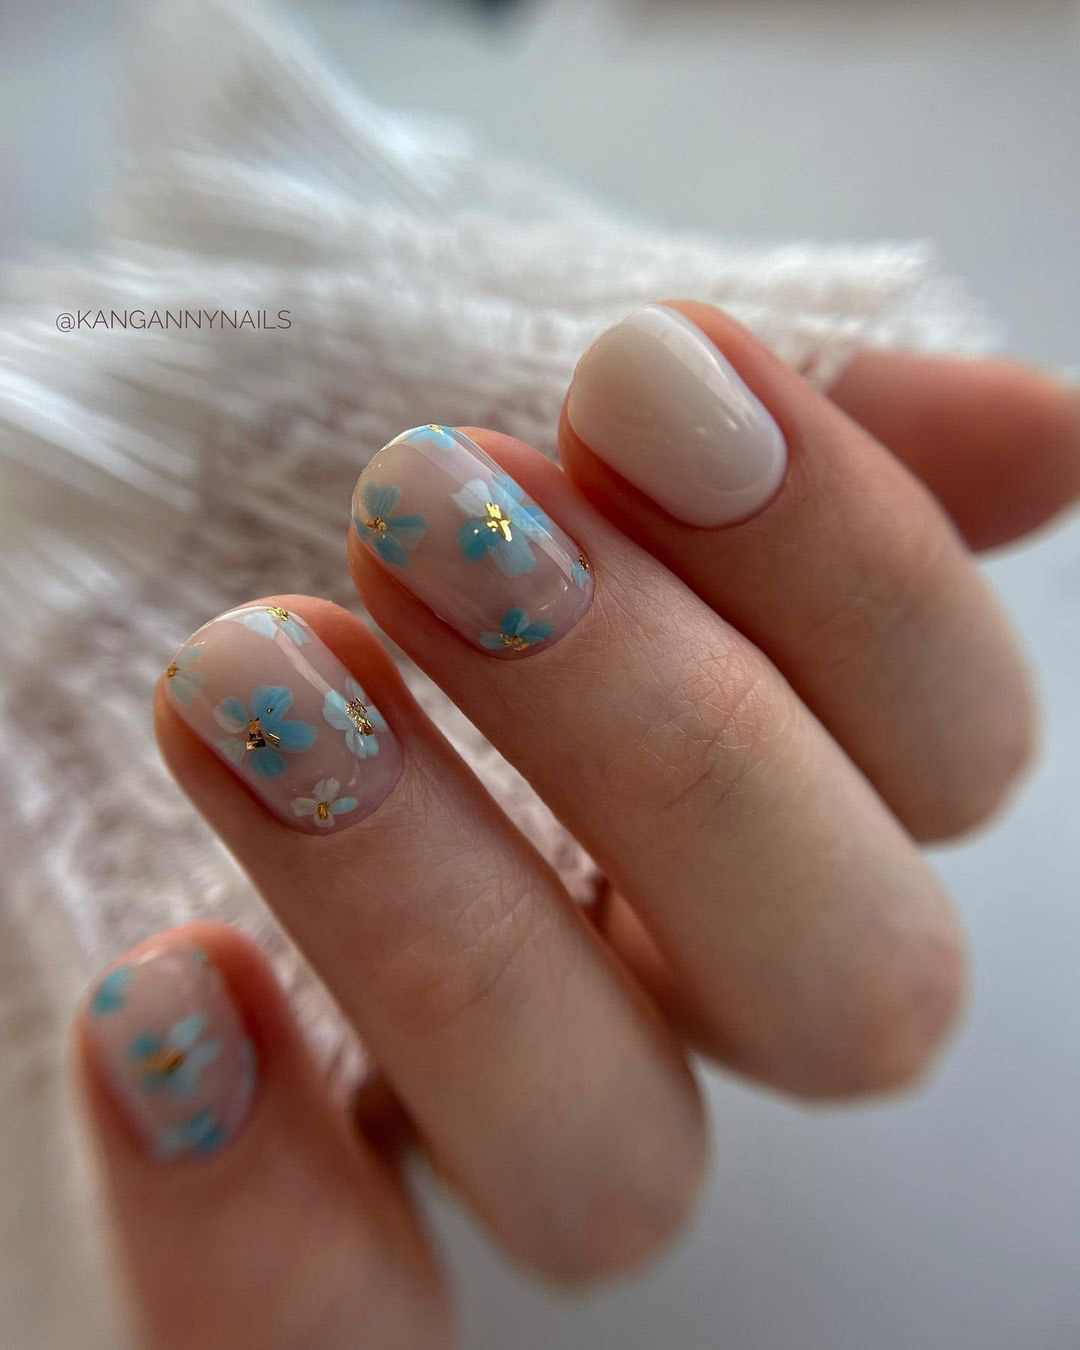 vintage wedding nails natural rustic with blue flowers kangannynails